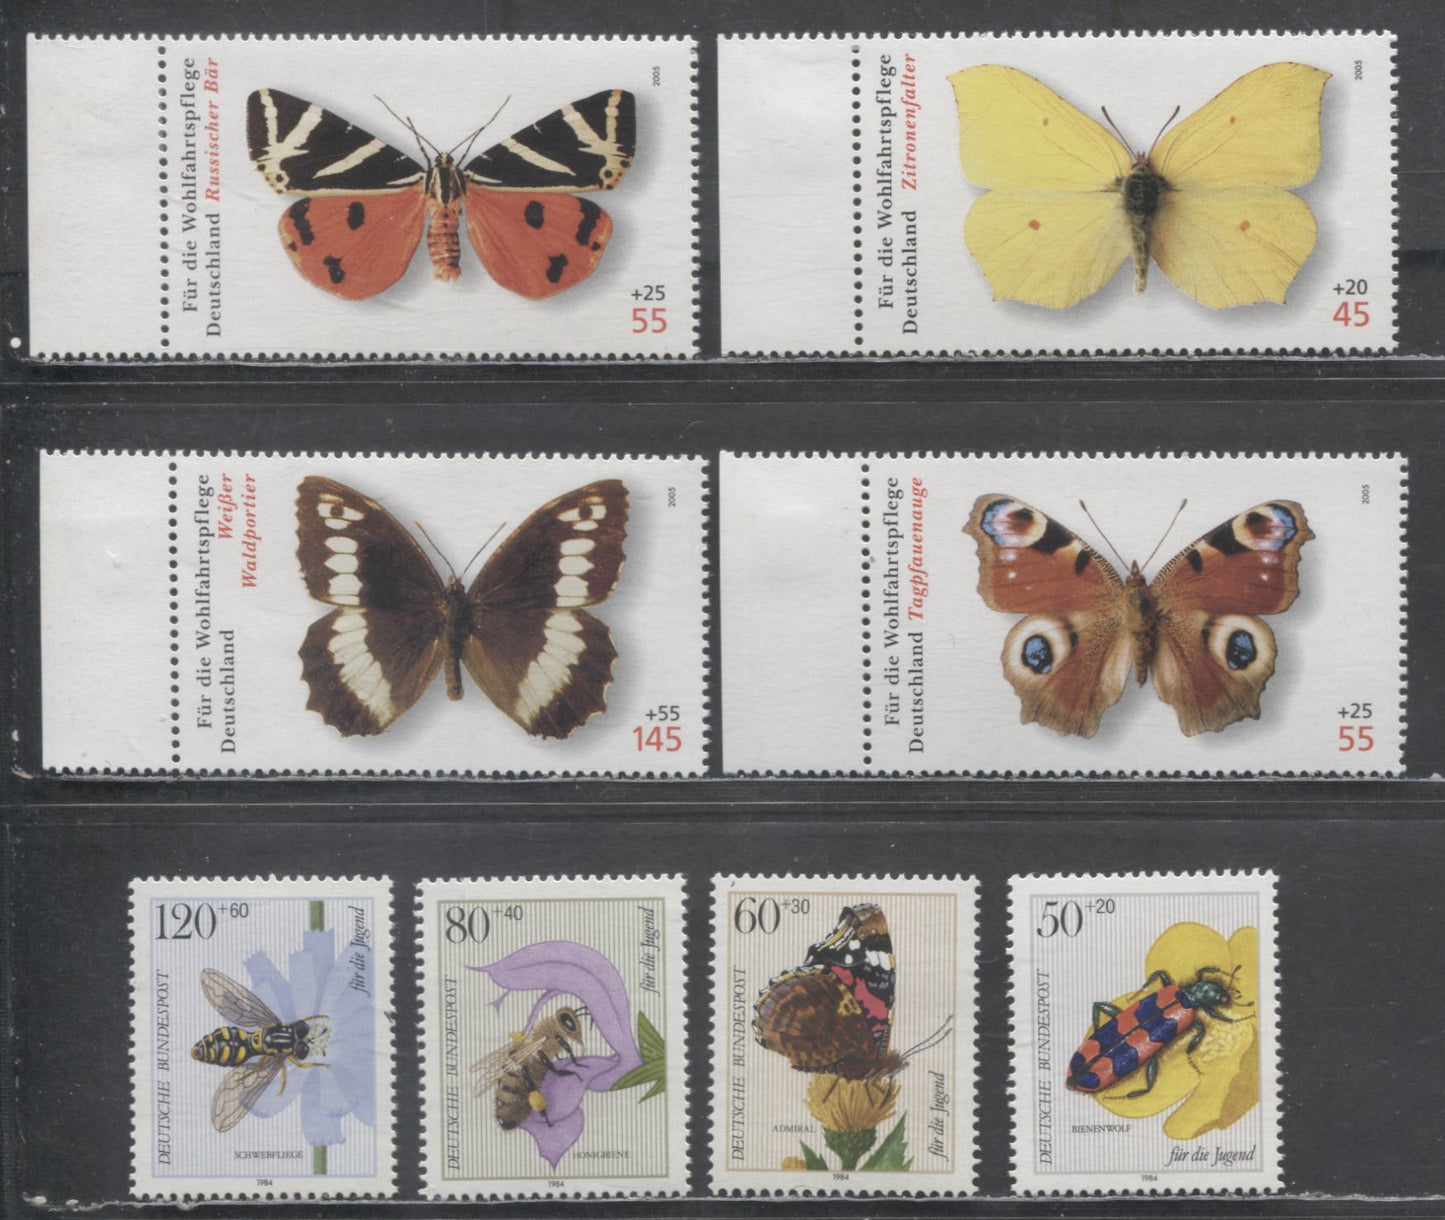 Lot 395 Germany SC#B616/B964 1984-2005 Insects & Butterfly Semi Postals, 8 VFOG Singles, Click on Listing to See ALL Pictures, 2017 Scott Cat. $15.45